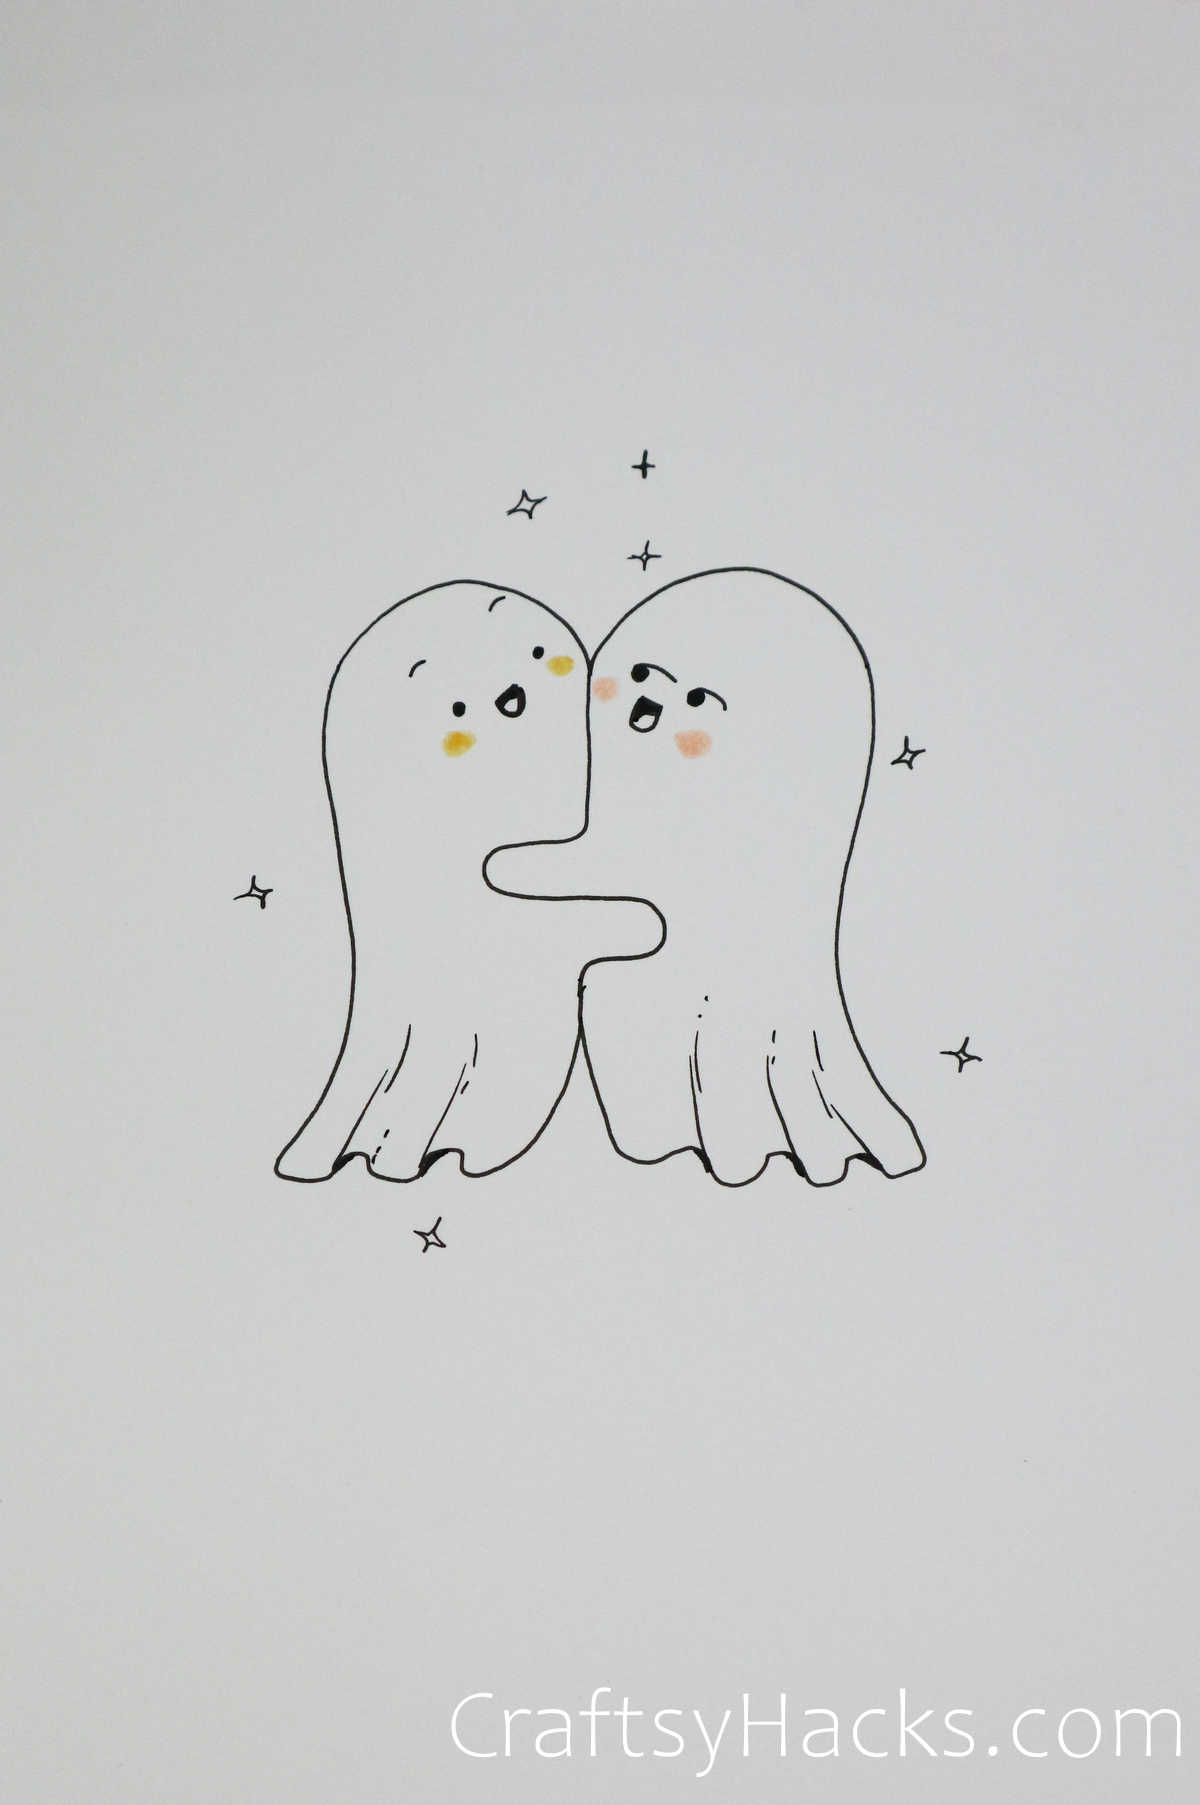 Easy Cute Love Drawings For Your Boyfriend – Gallery HD wallpaper | Pxfuel-saigonsouth.com.vn